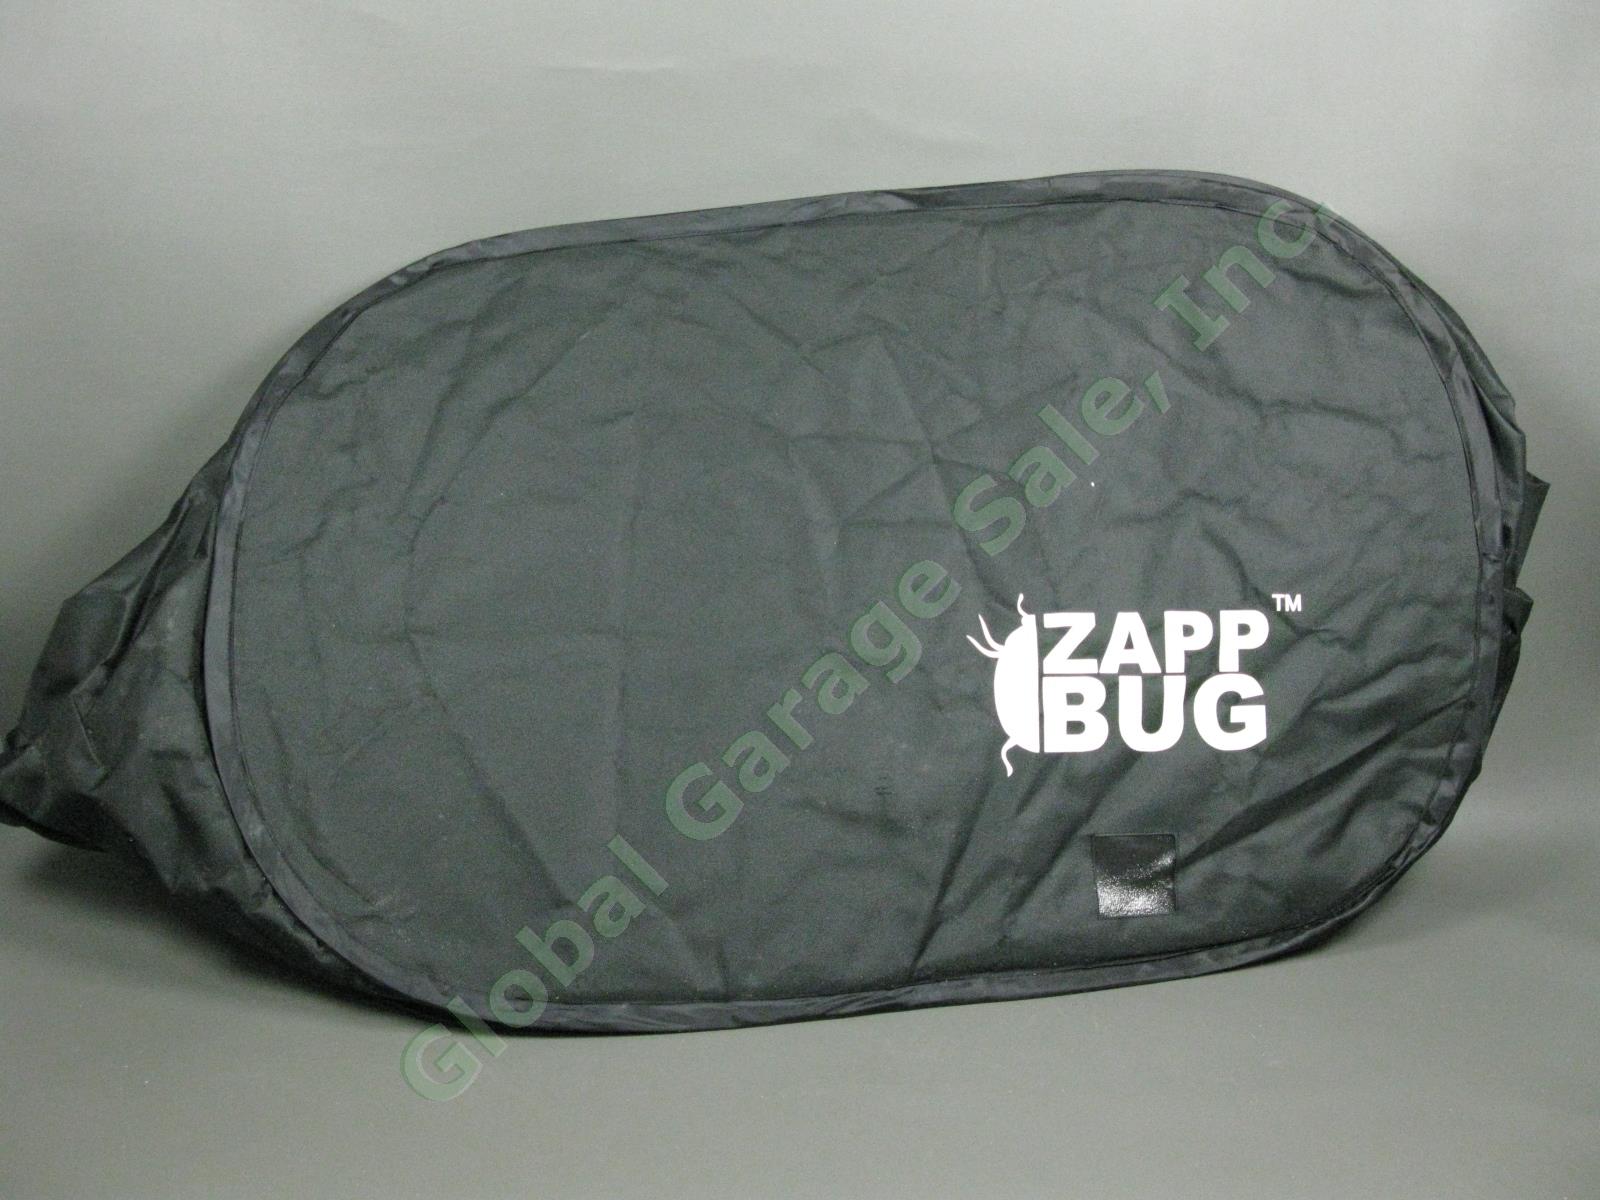 NEW ZappBug Heater Electric Bed Bug Killer Corded Home Insect Pest Control NIB 3